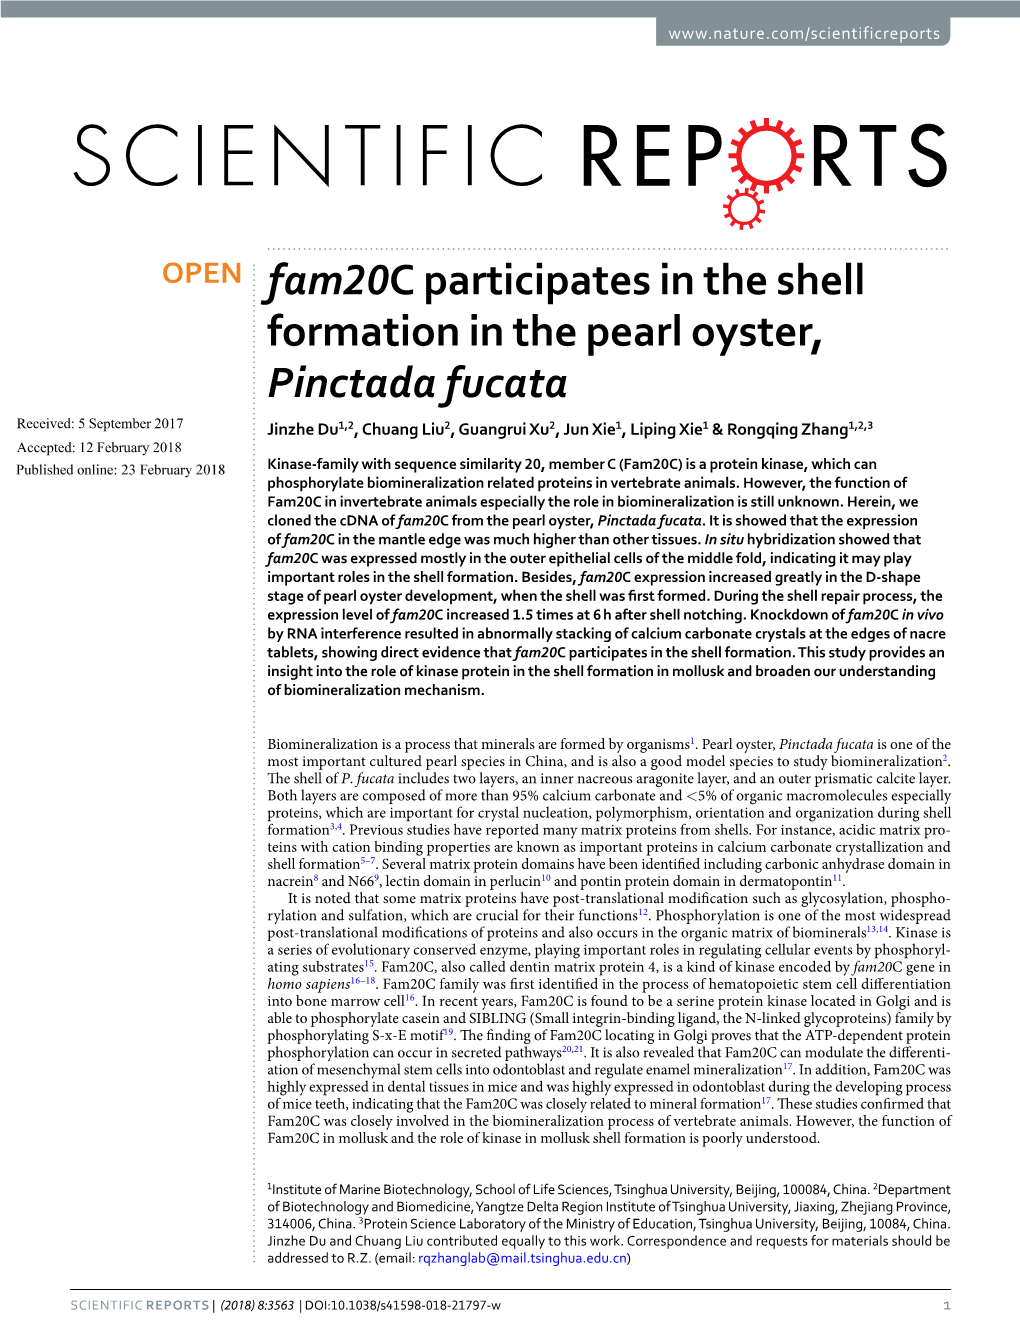 Fam20c Participates in the Shell Formation in the Pearl Oyster, Pinctada Fucata